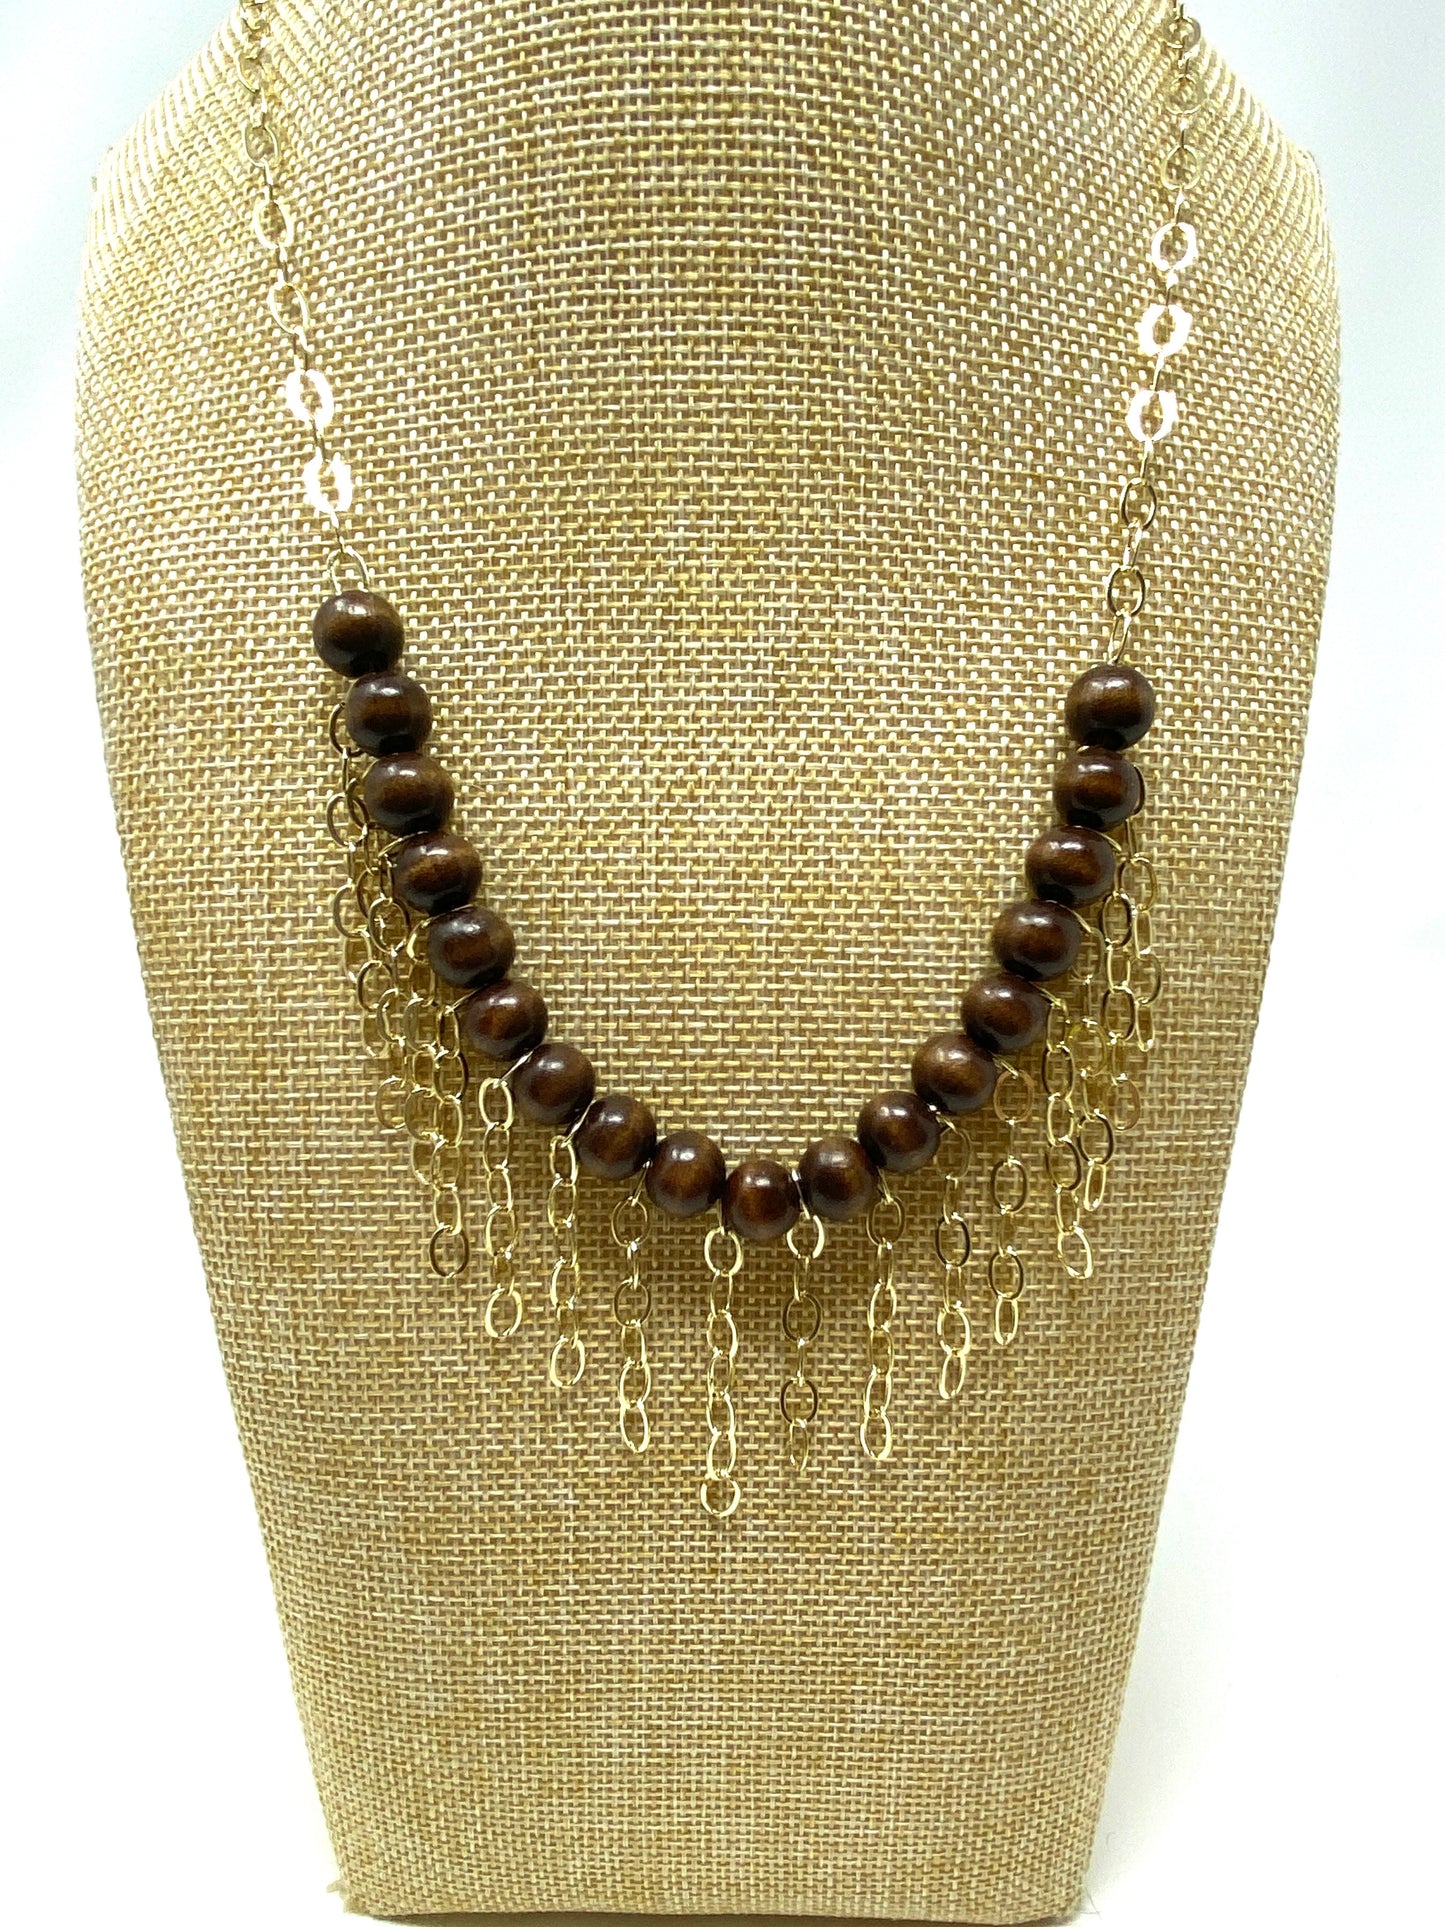 Gold Filled Chain Necklace with Brown Wooden Beads